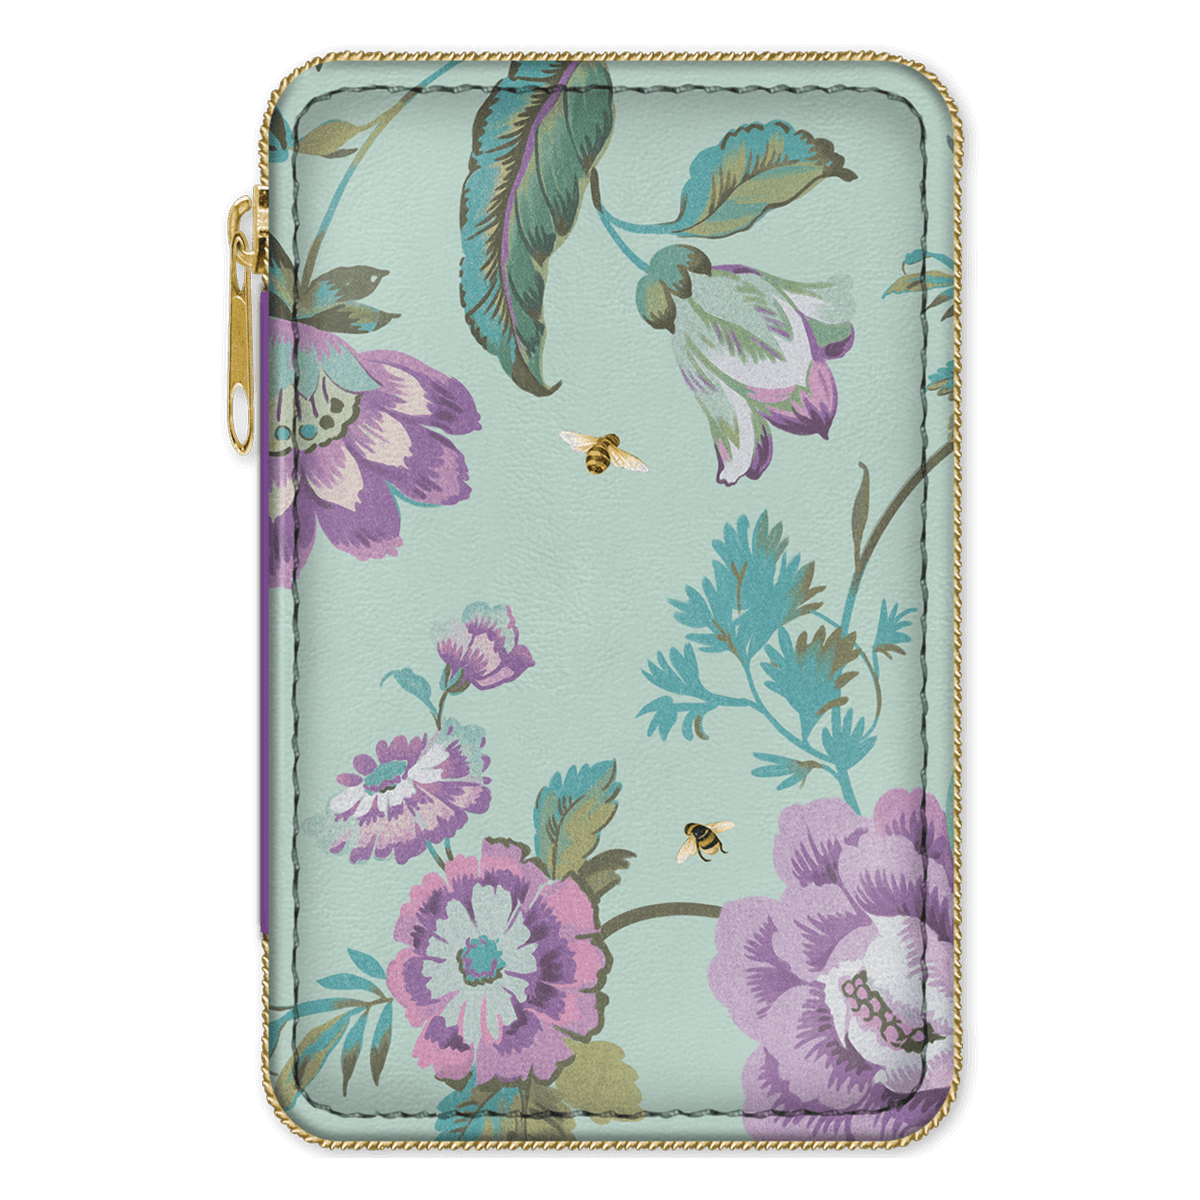 Mint green sewing kit with flowers and bees. Gold zipper closure